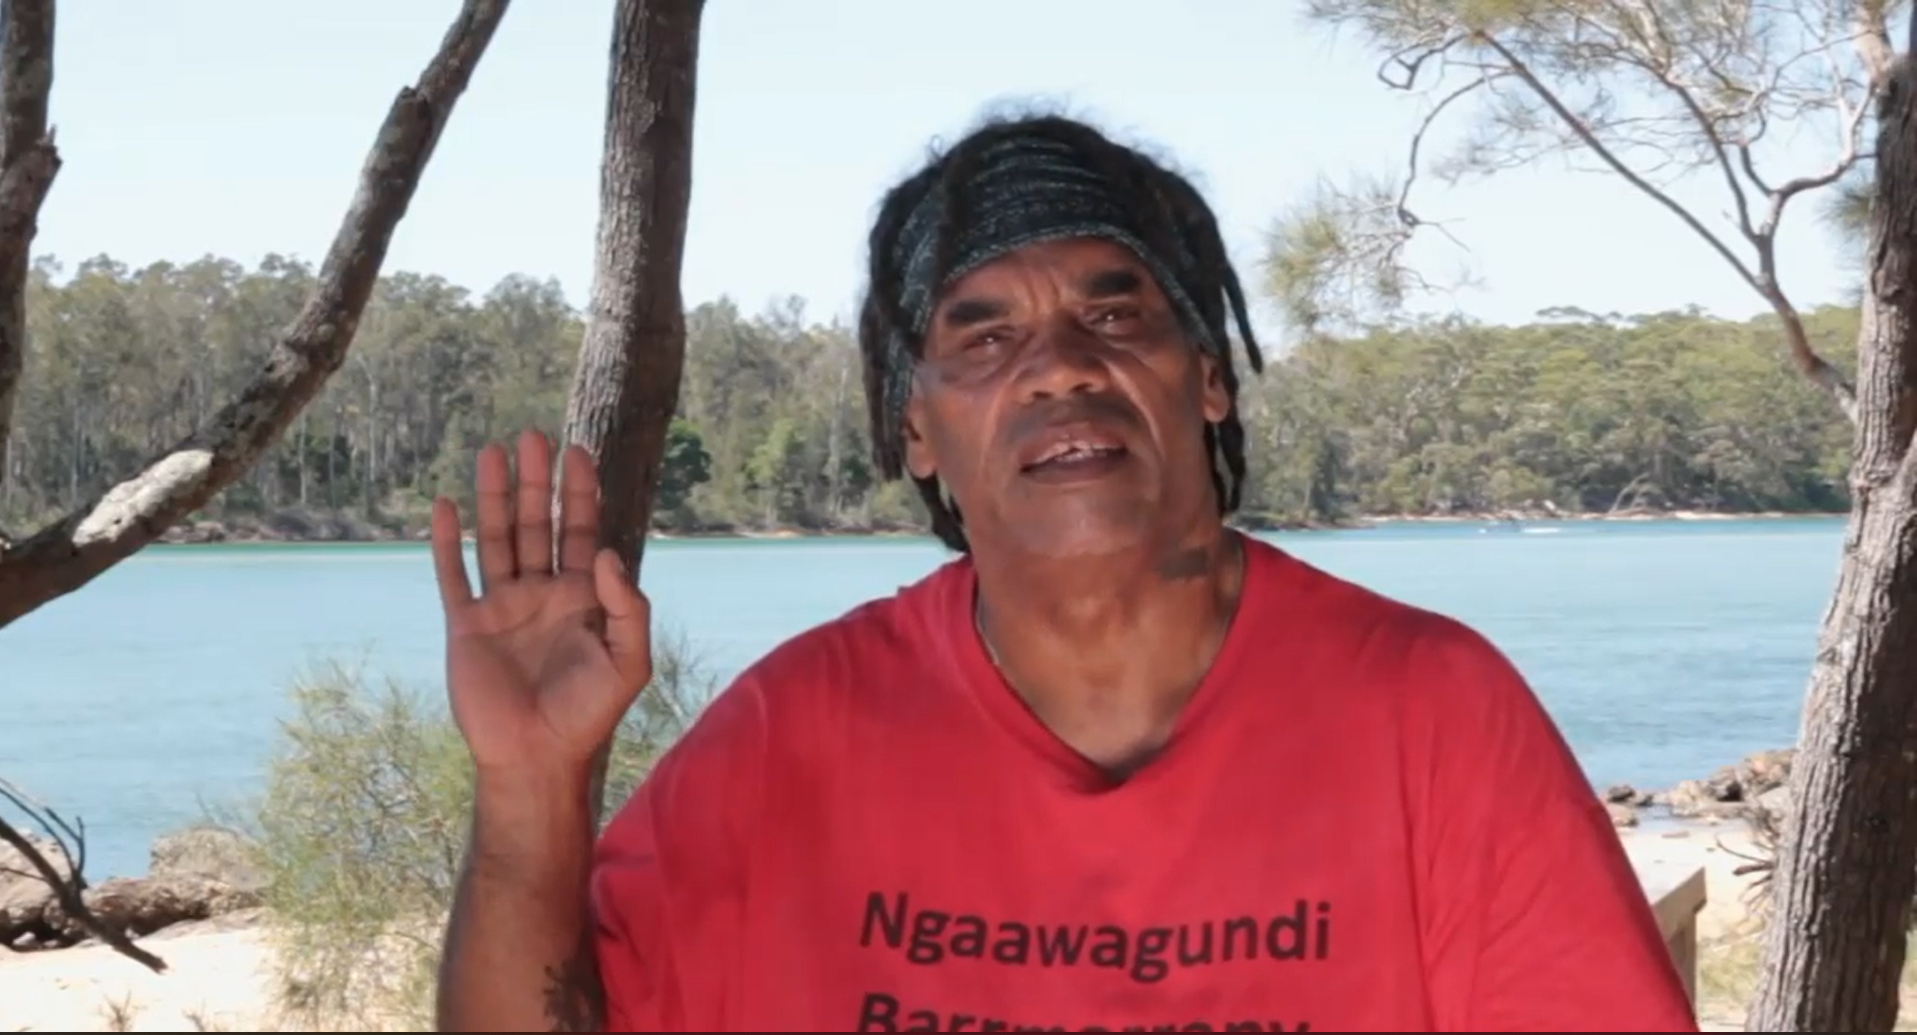 This Place: Dreamtime story of the Nambucca River